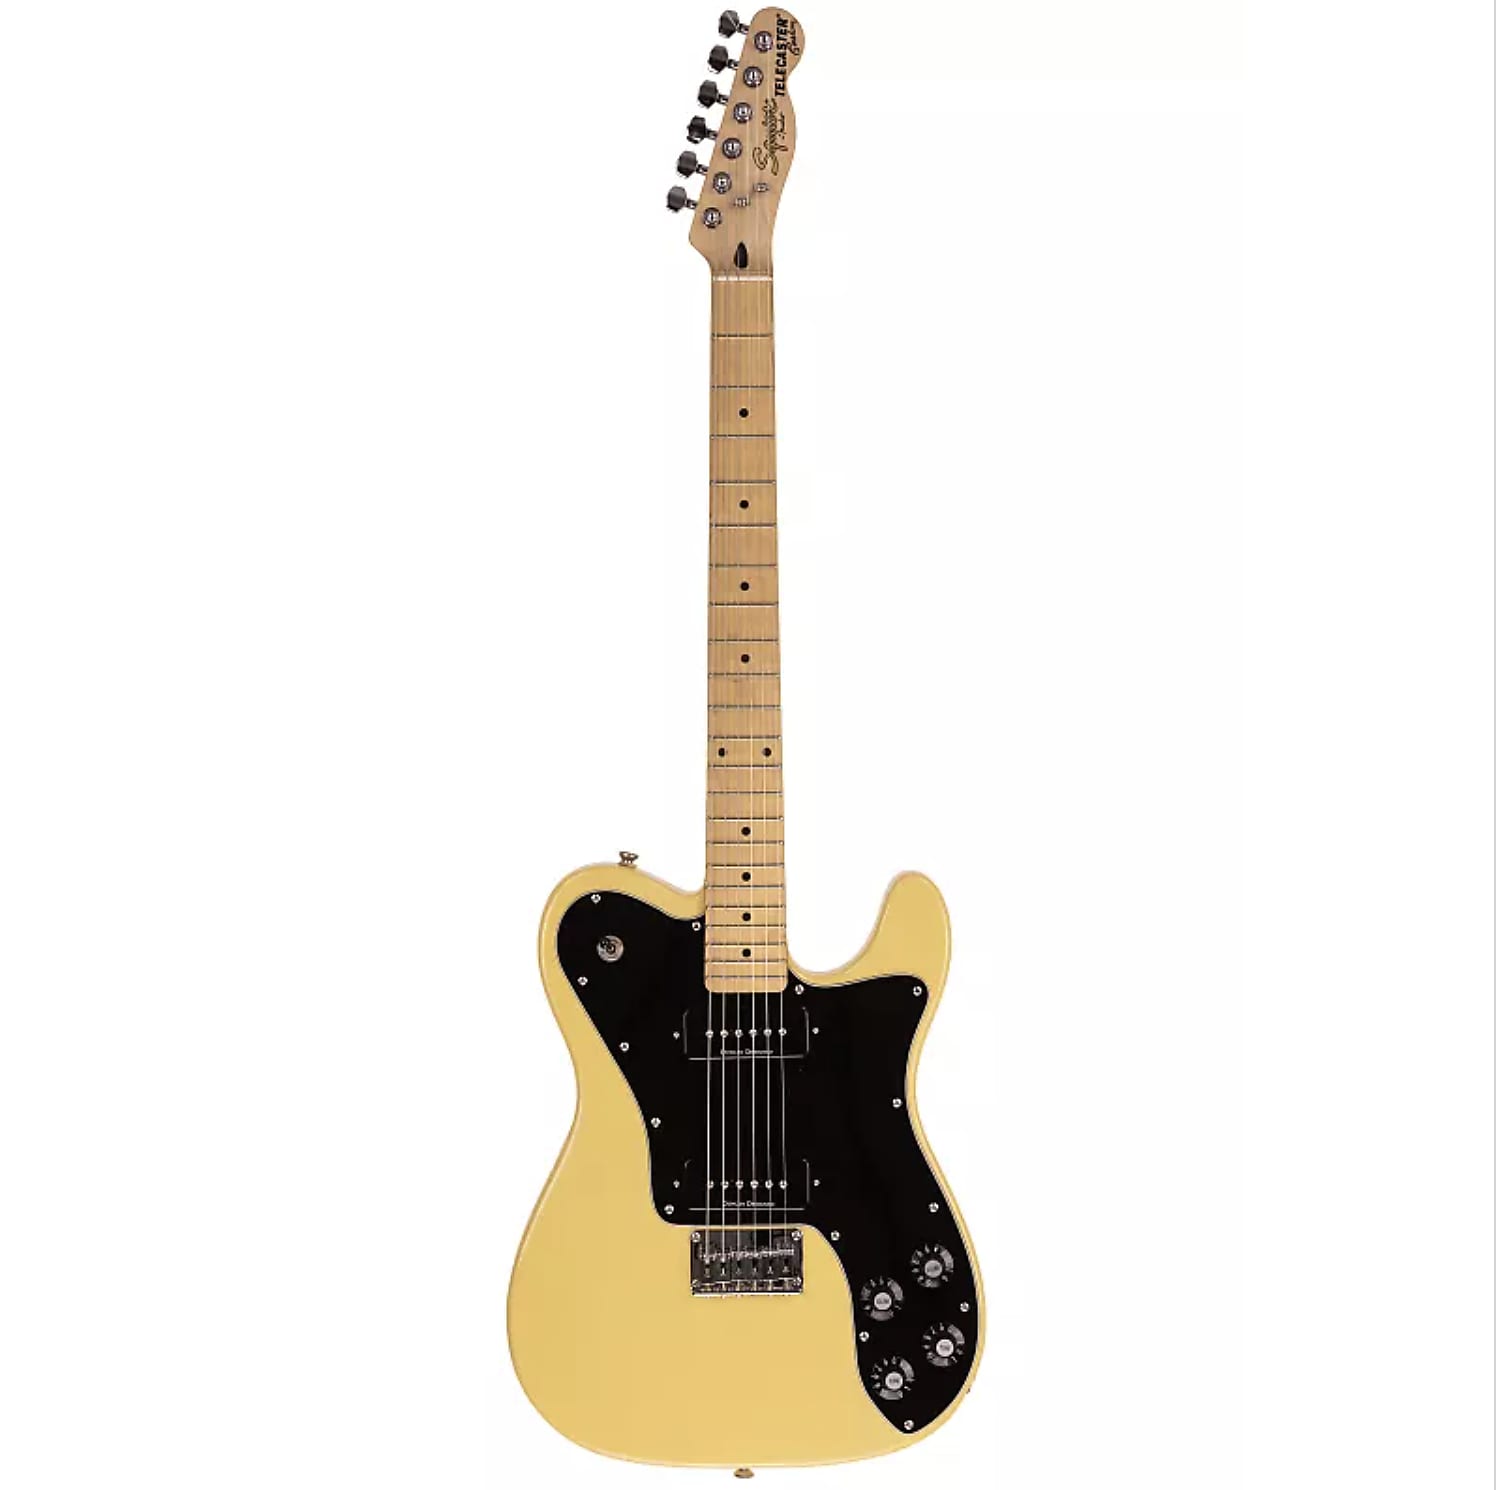 Squier Vintage Modified Telecaster Spもう少し検討させていただき 